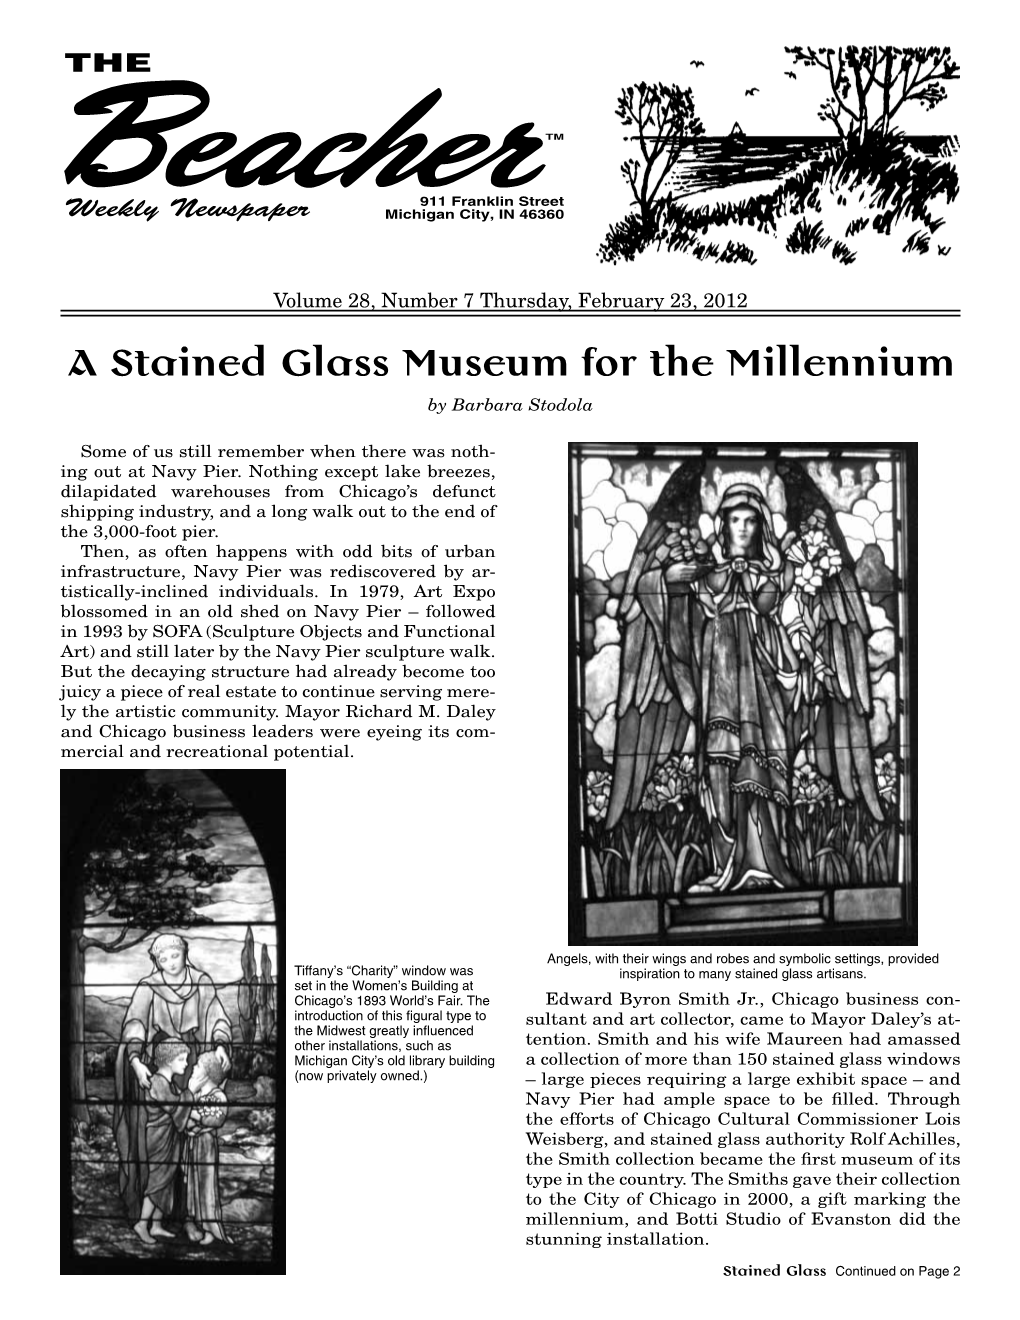 A Stained Glass Museum for the Millennium by Barbara Stodola